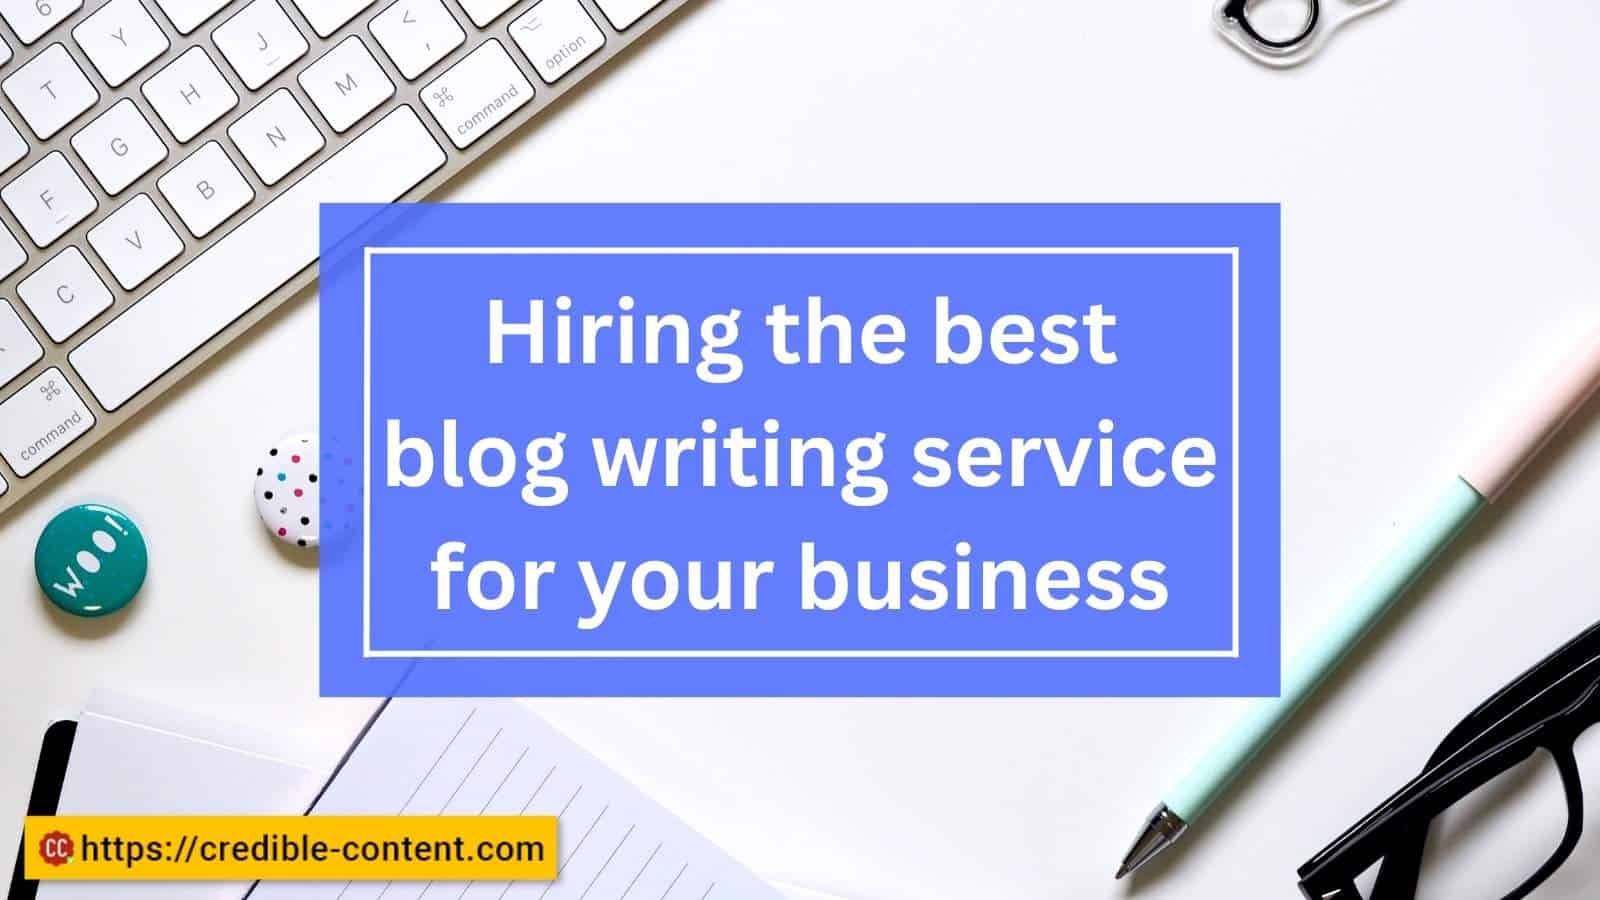 Hiring the best blogging service for your business